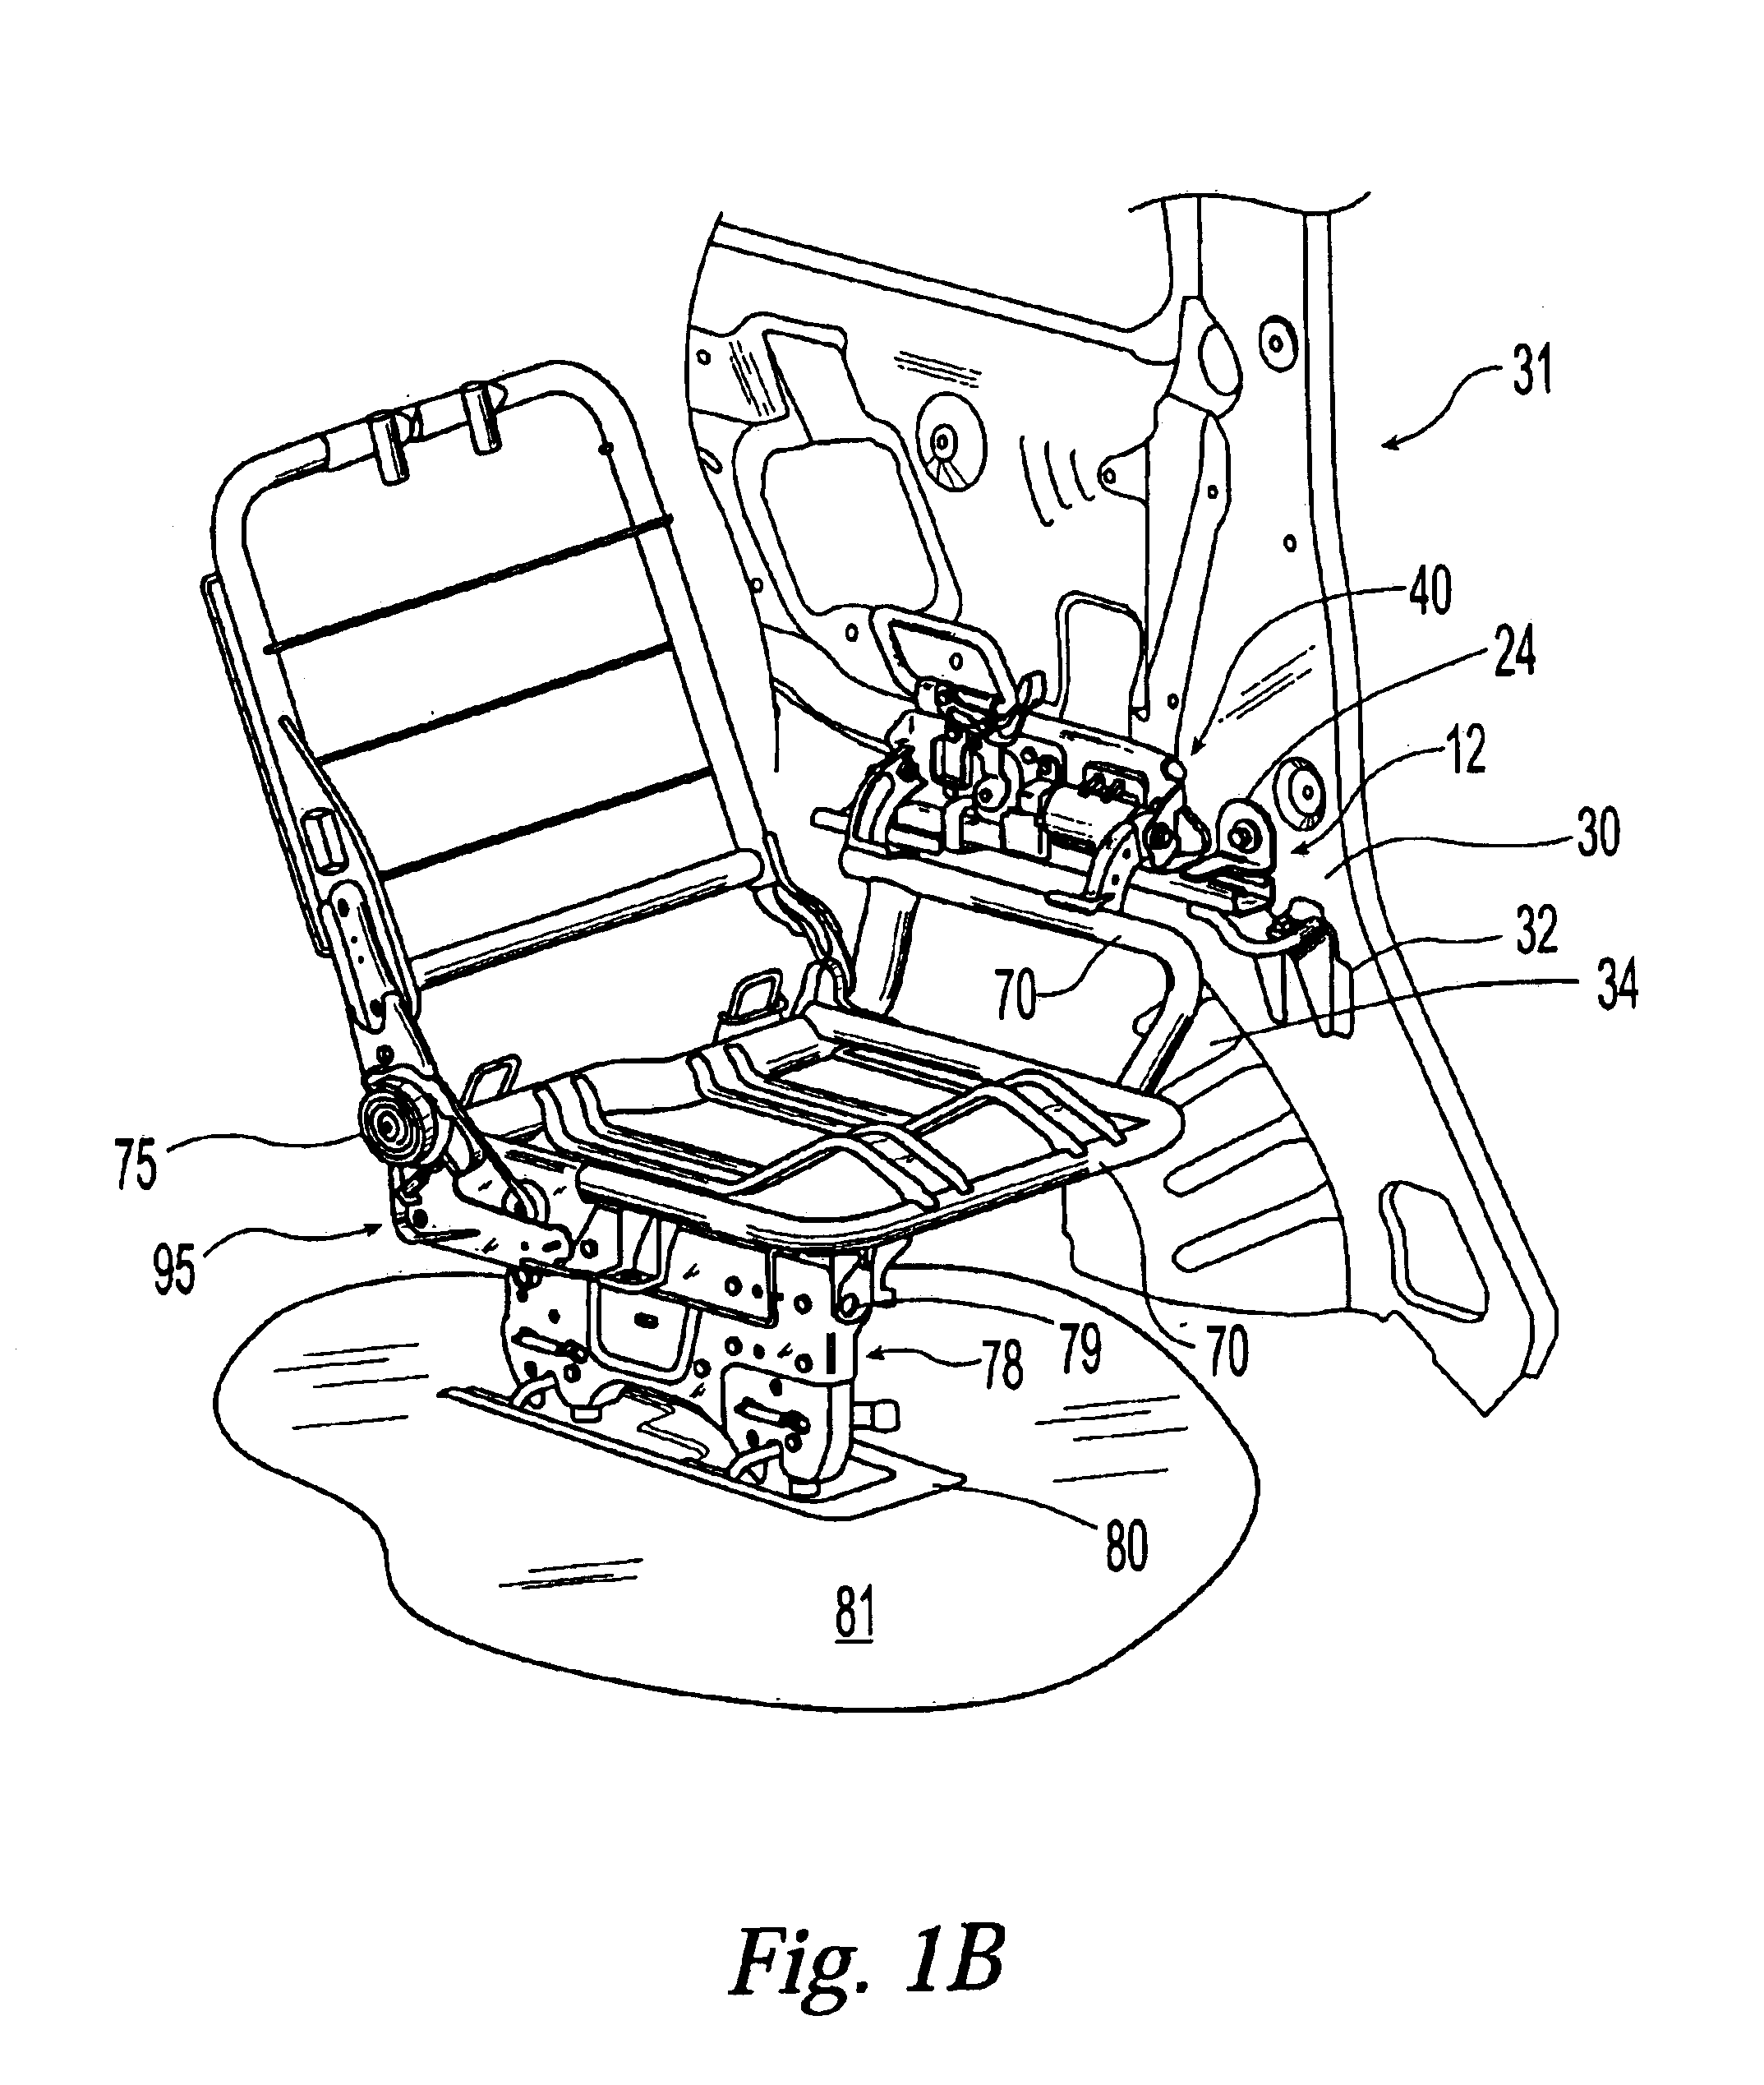 Removable jump seat for a vehicle